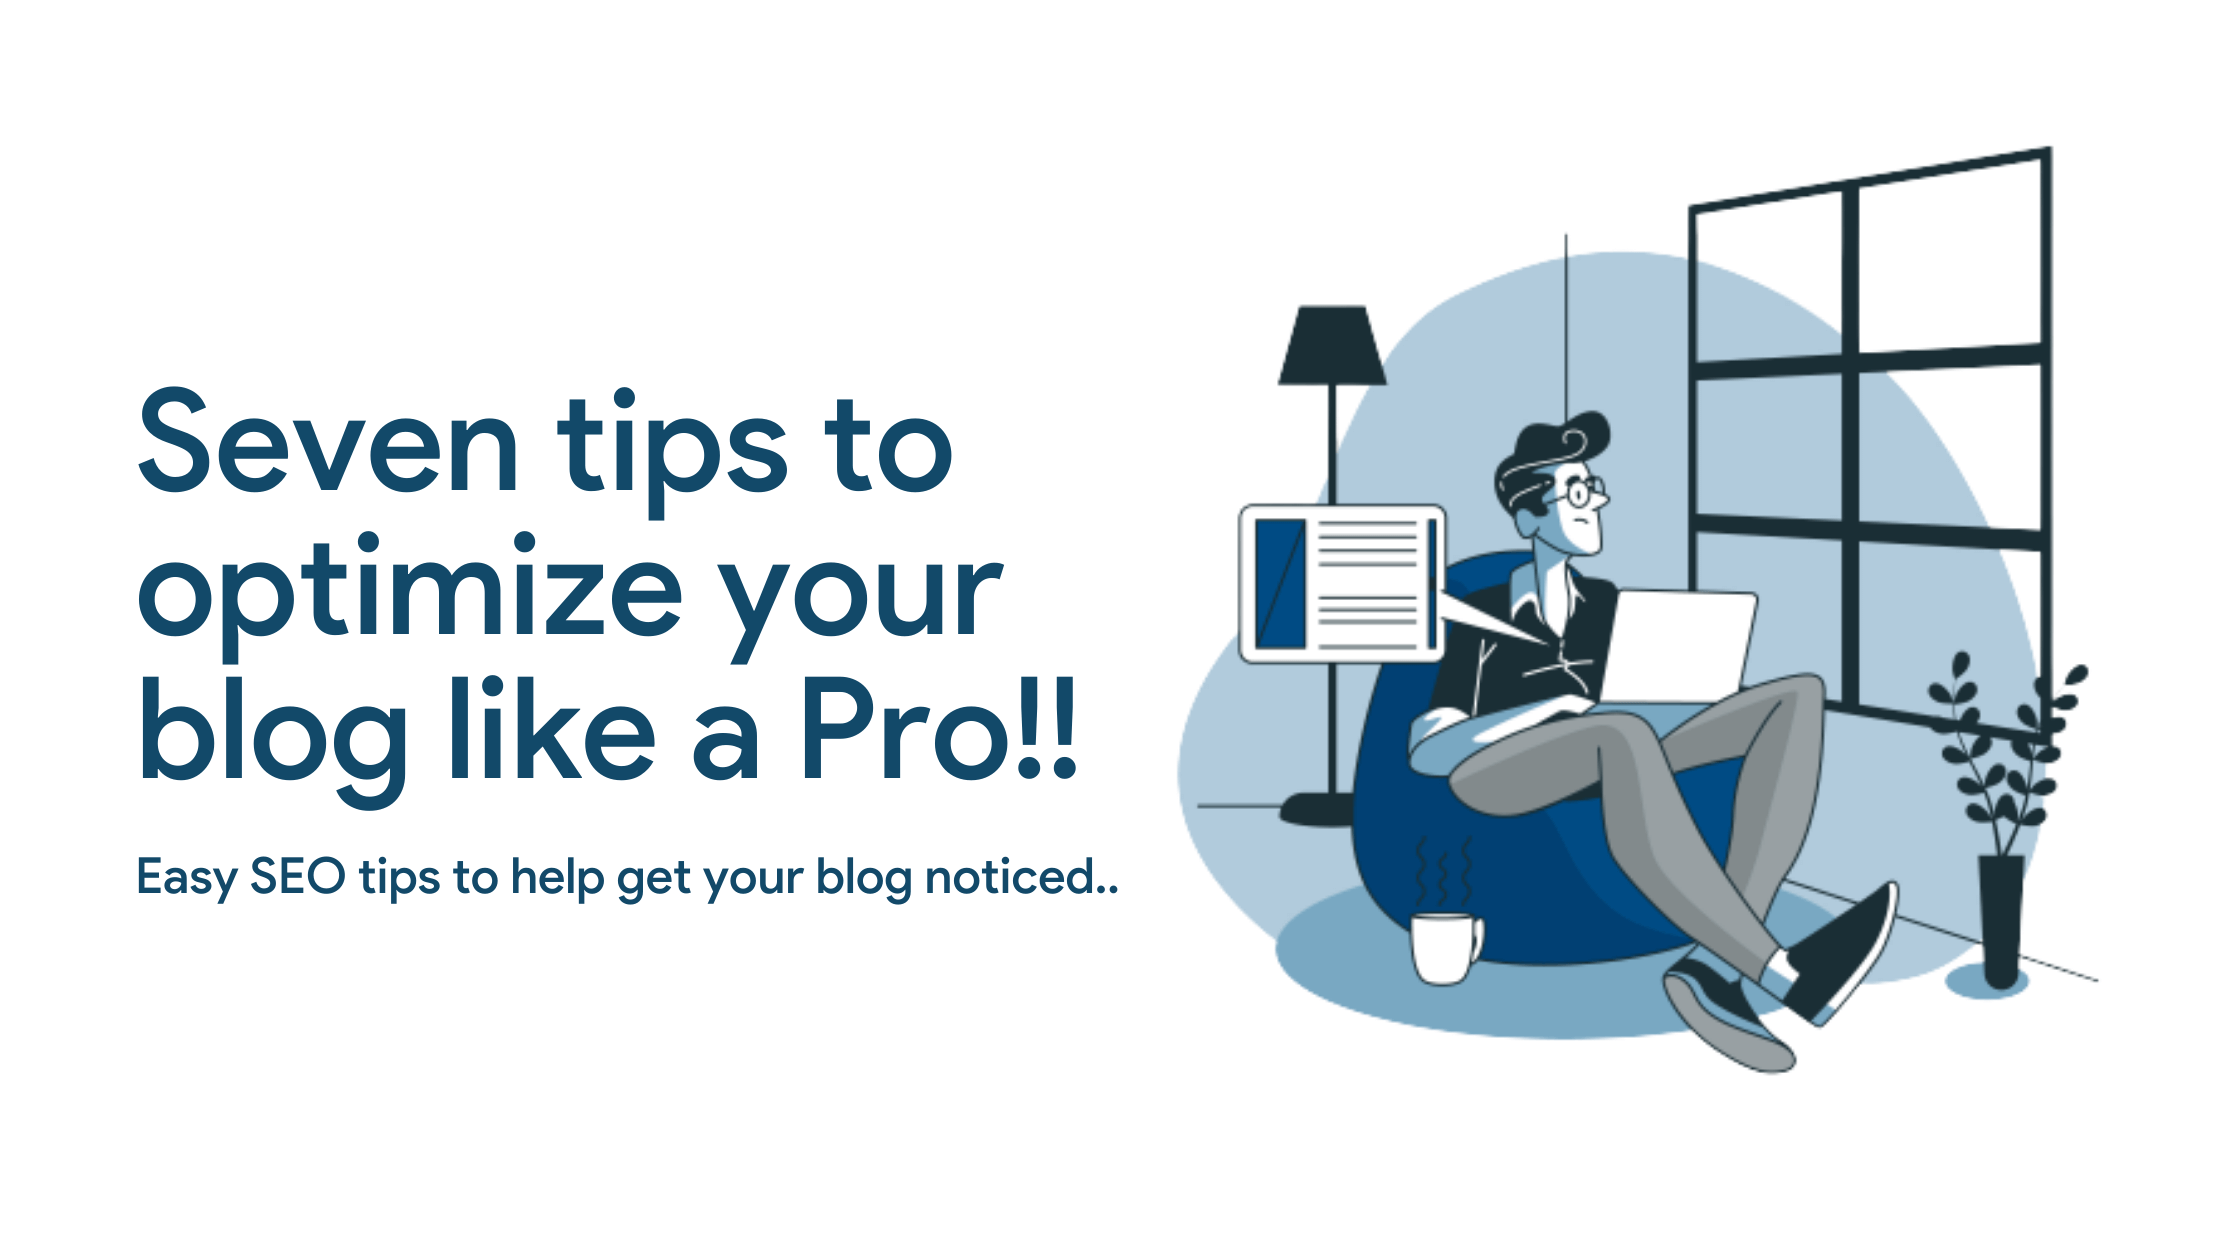 Seven tips to optimize your blog like a Pro